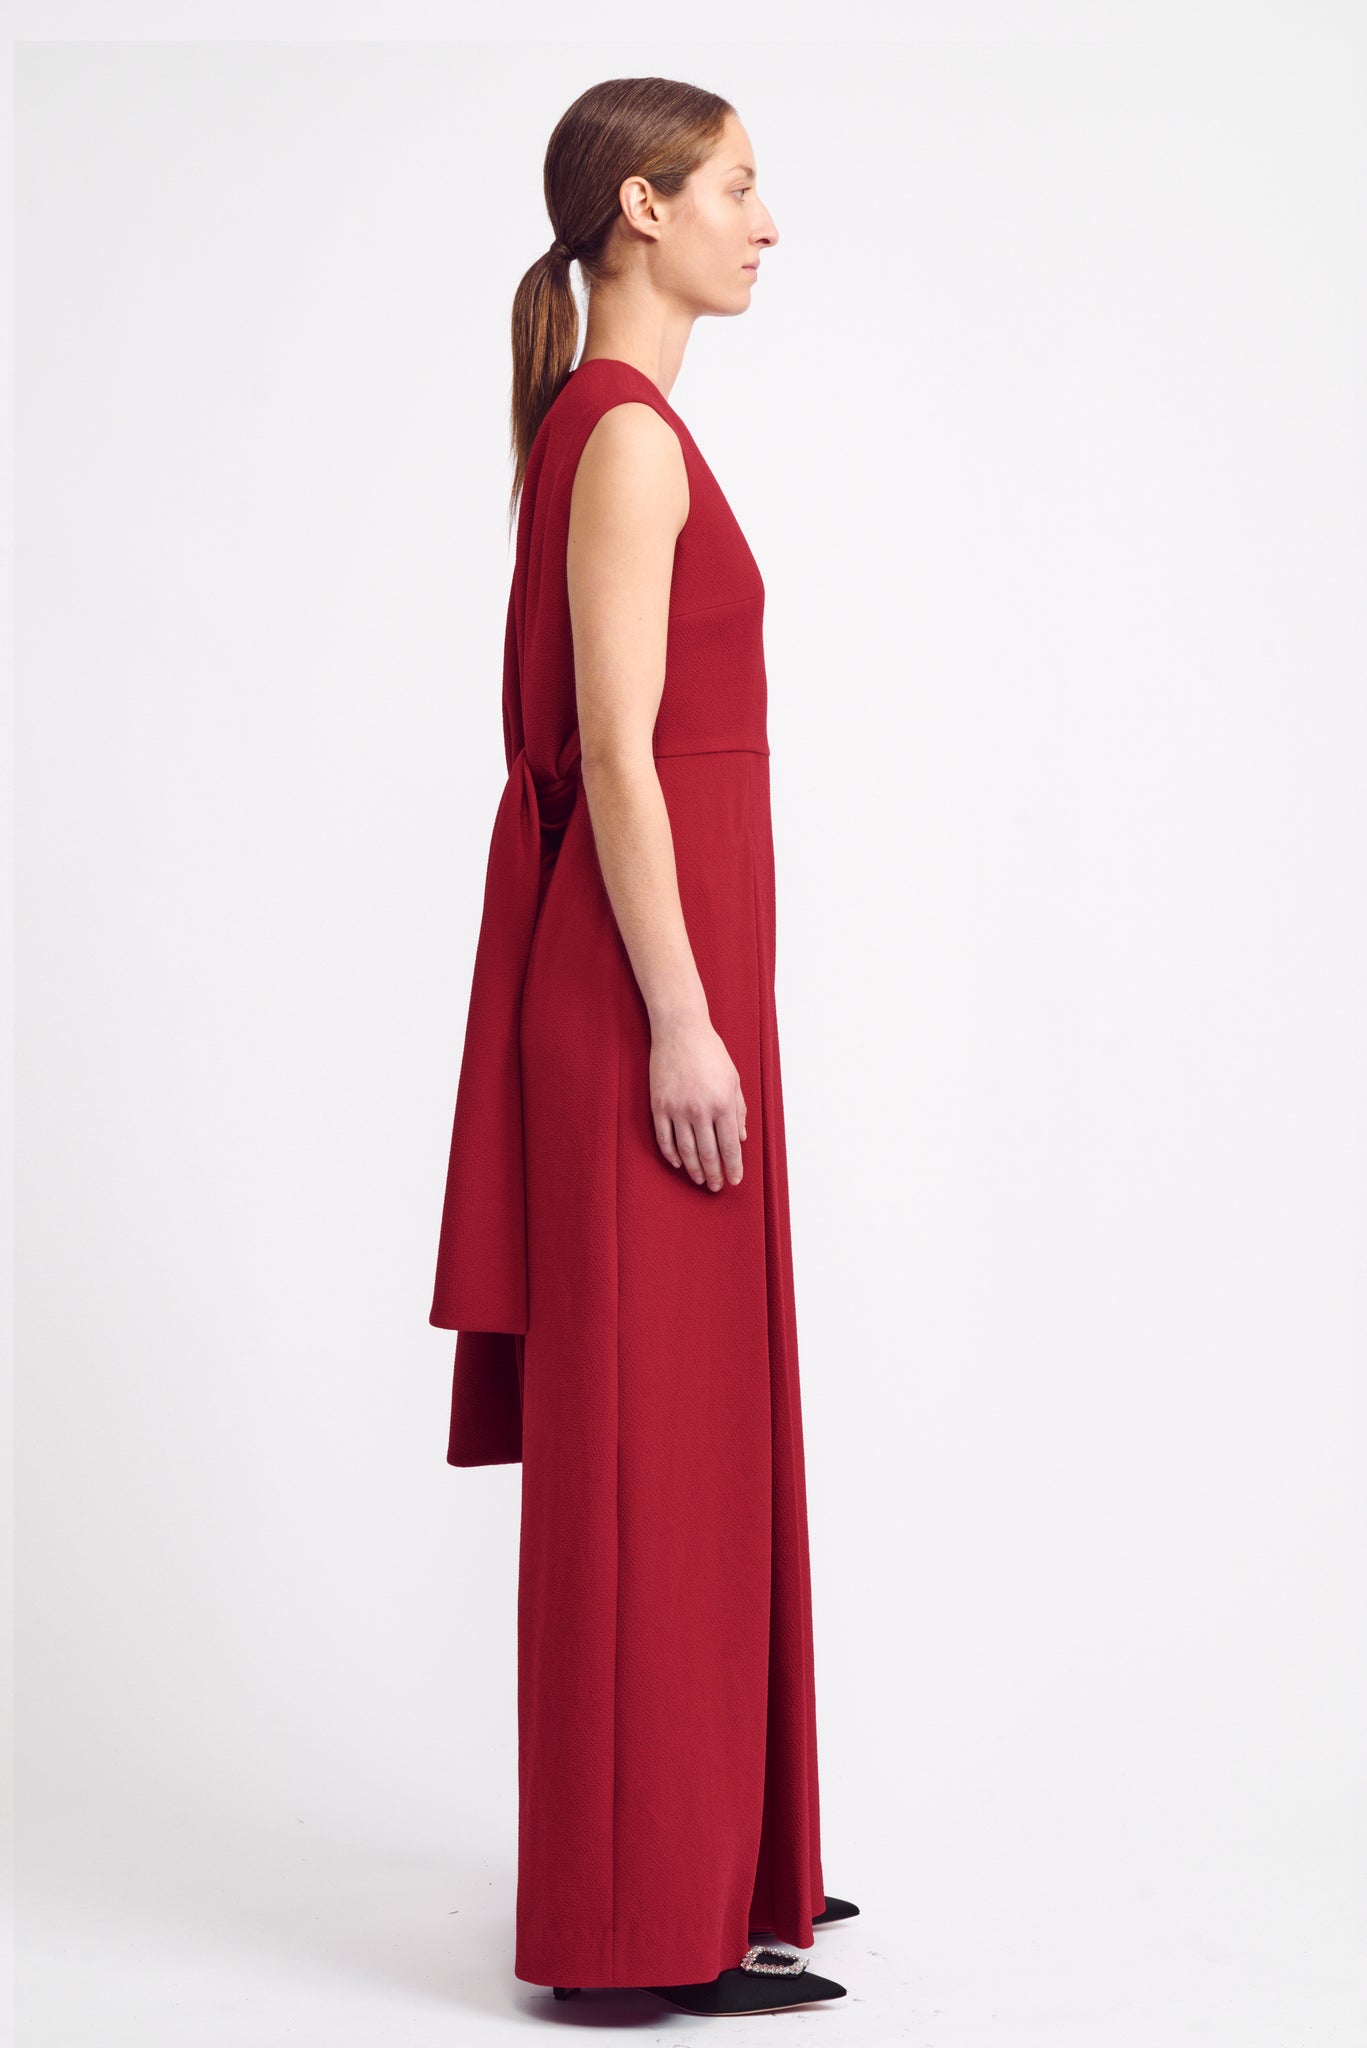 Charmaine Tie-Back Jumpsuit in Red Double Crepe | Emilia Wickstead